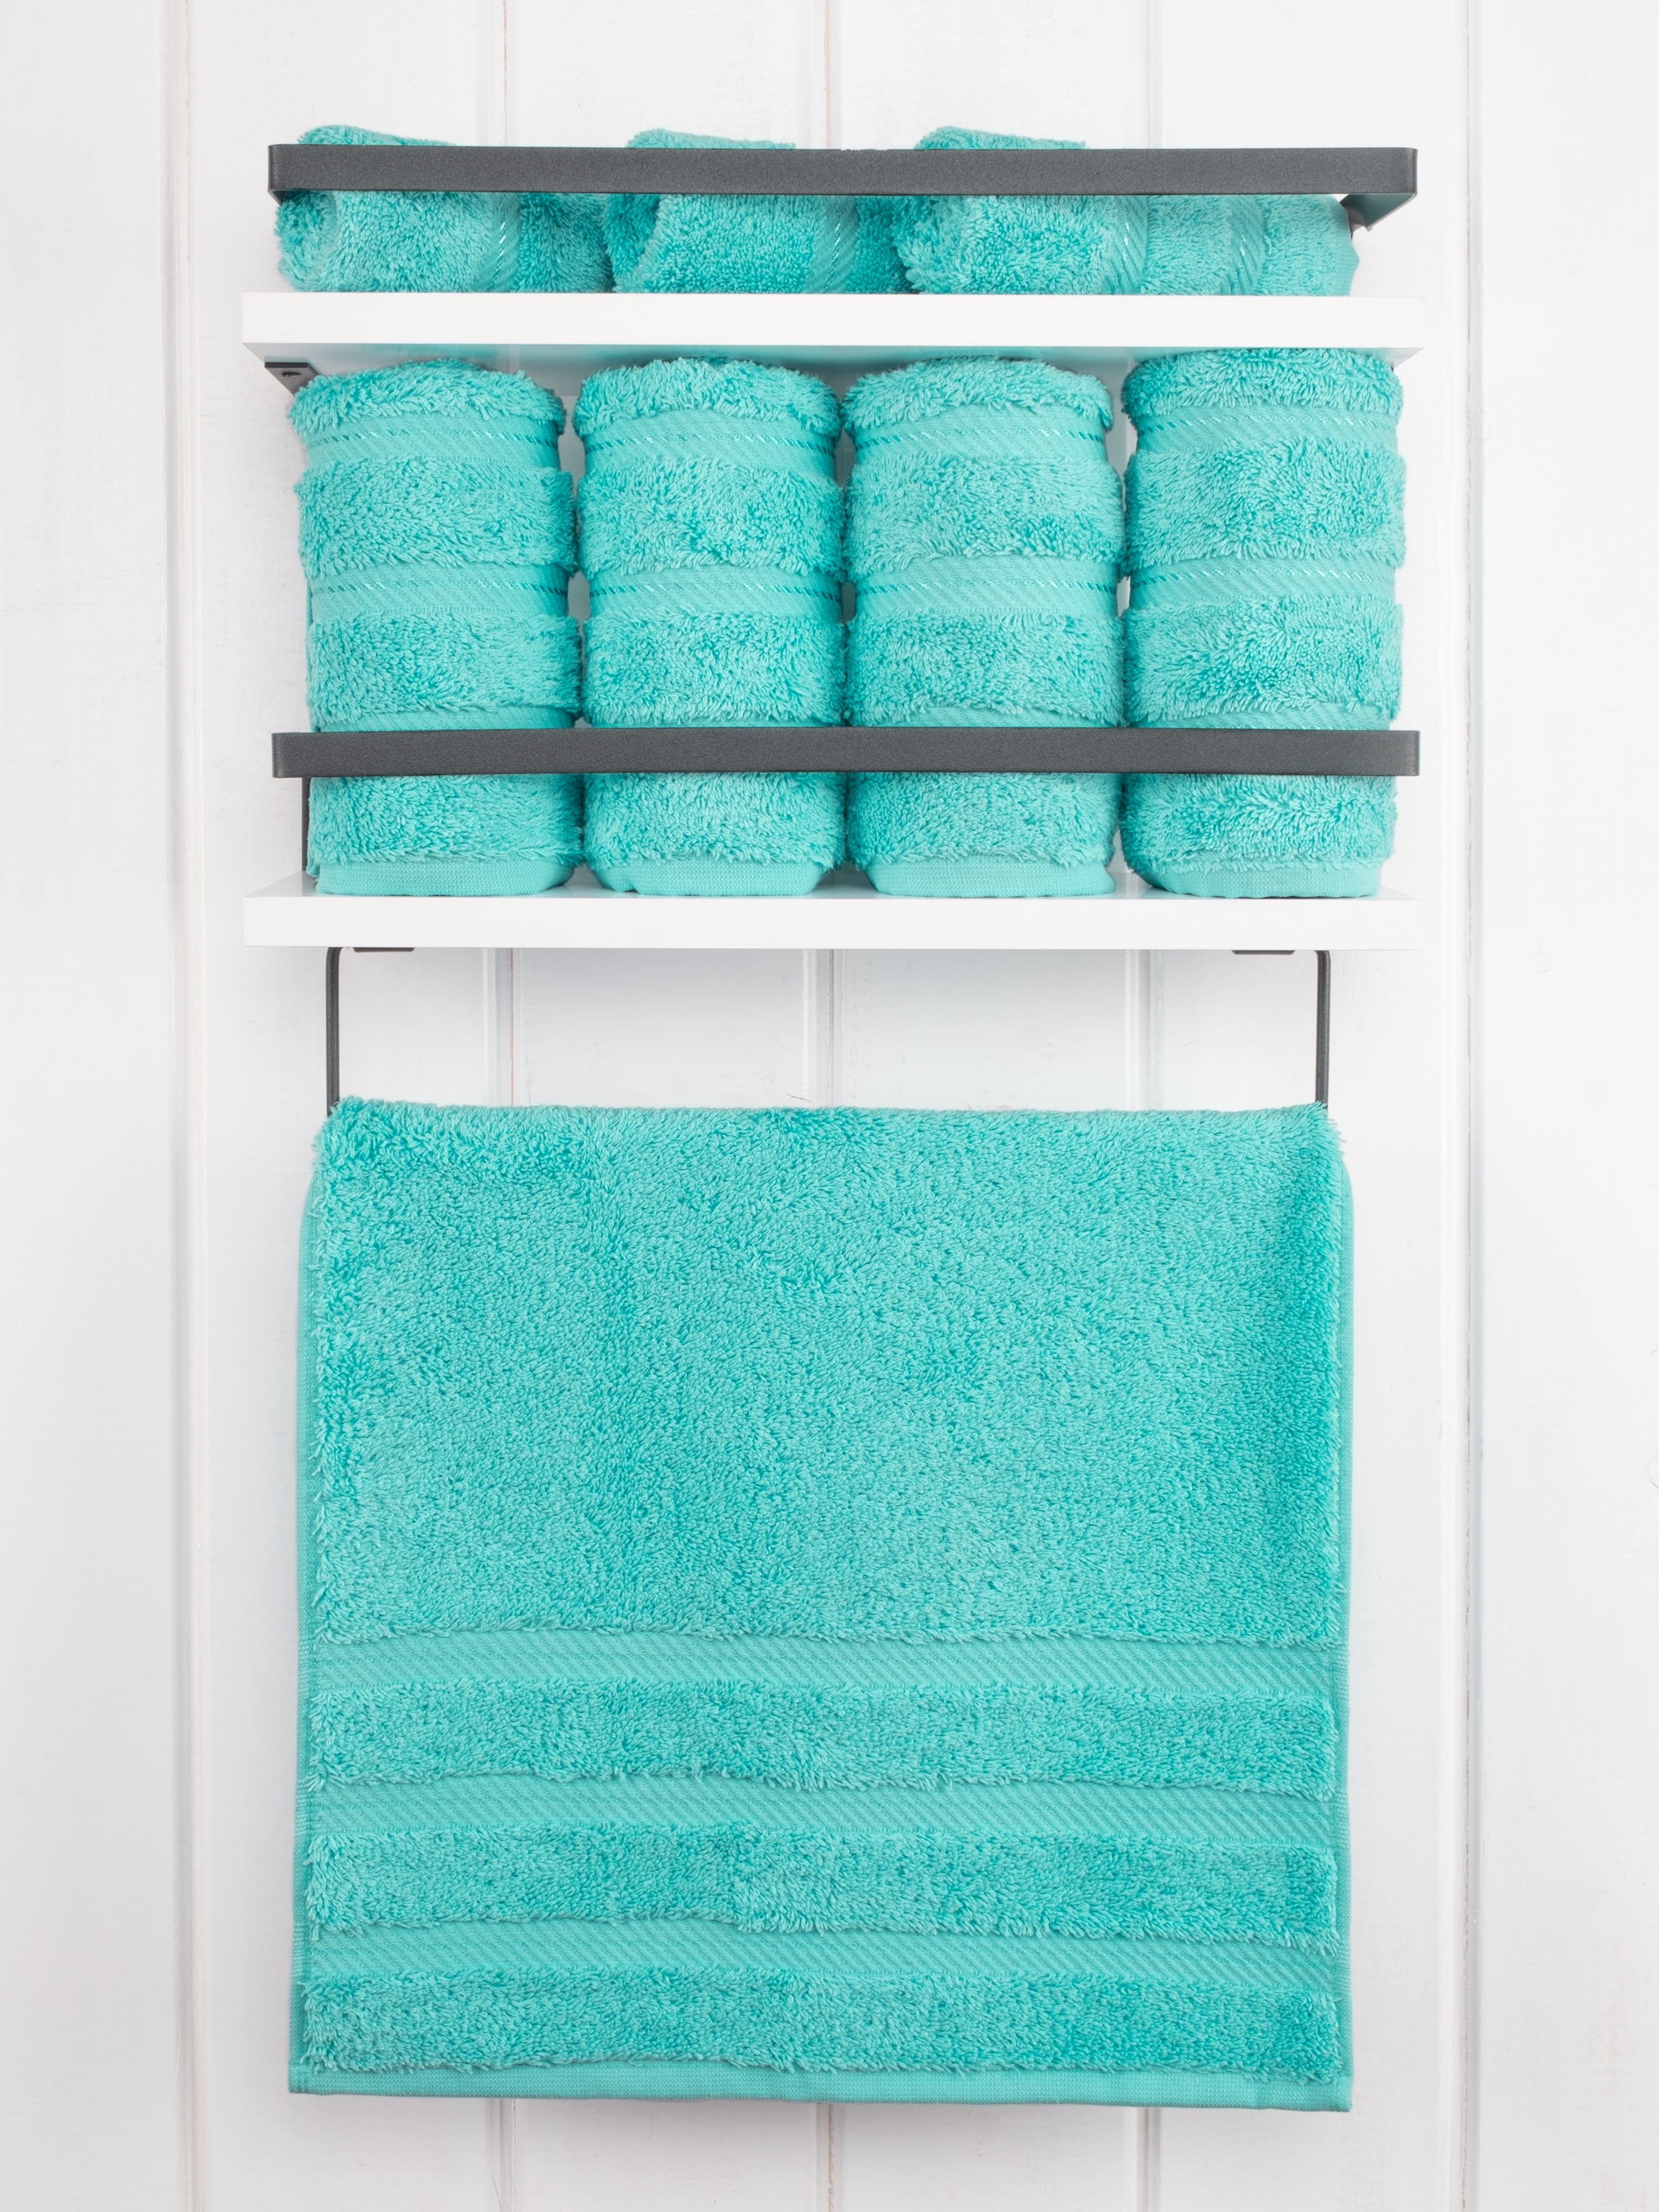 American Soft Linen Washcloth Set 100% Turkish Cotton 4 Piece Face Hand Towels for Bathroom and Kitchen - Aqua Blue